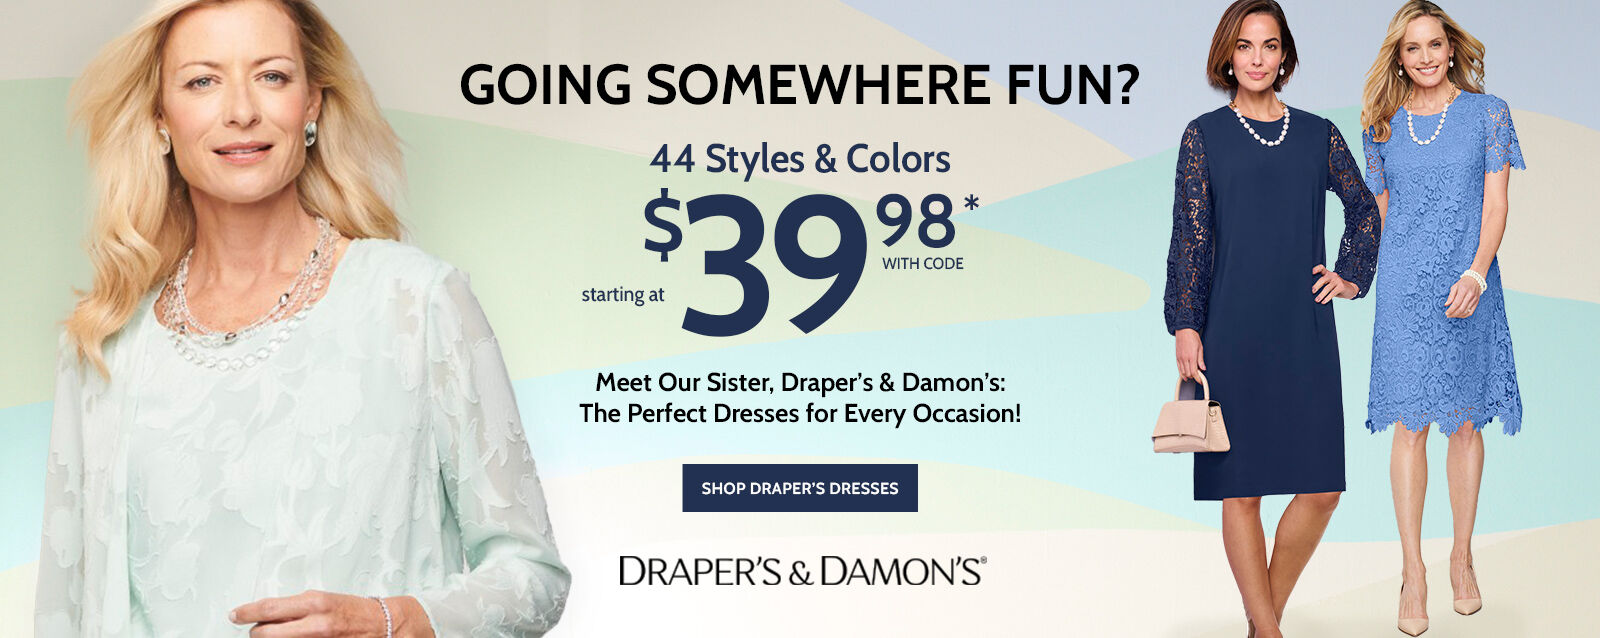 going somewhere fun? 44 styles & colors starting at $39.98* Meet our Sister, Draper's & Damon's: The perfect dresses for every occasion! shop draper's dresses draper's & damon's® *prices as marked. online only.